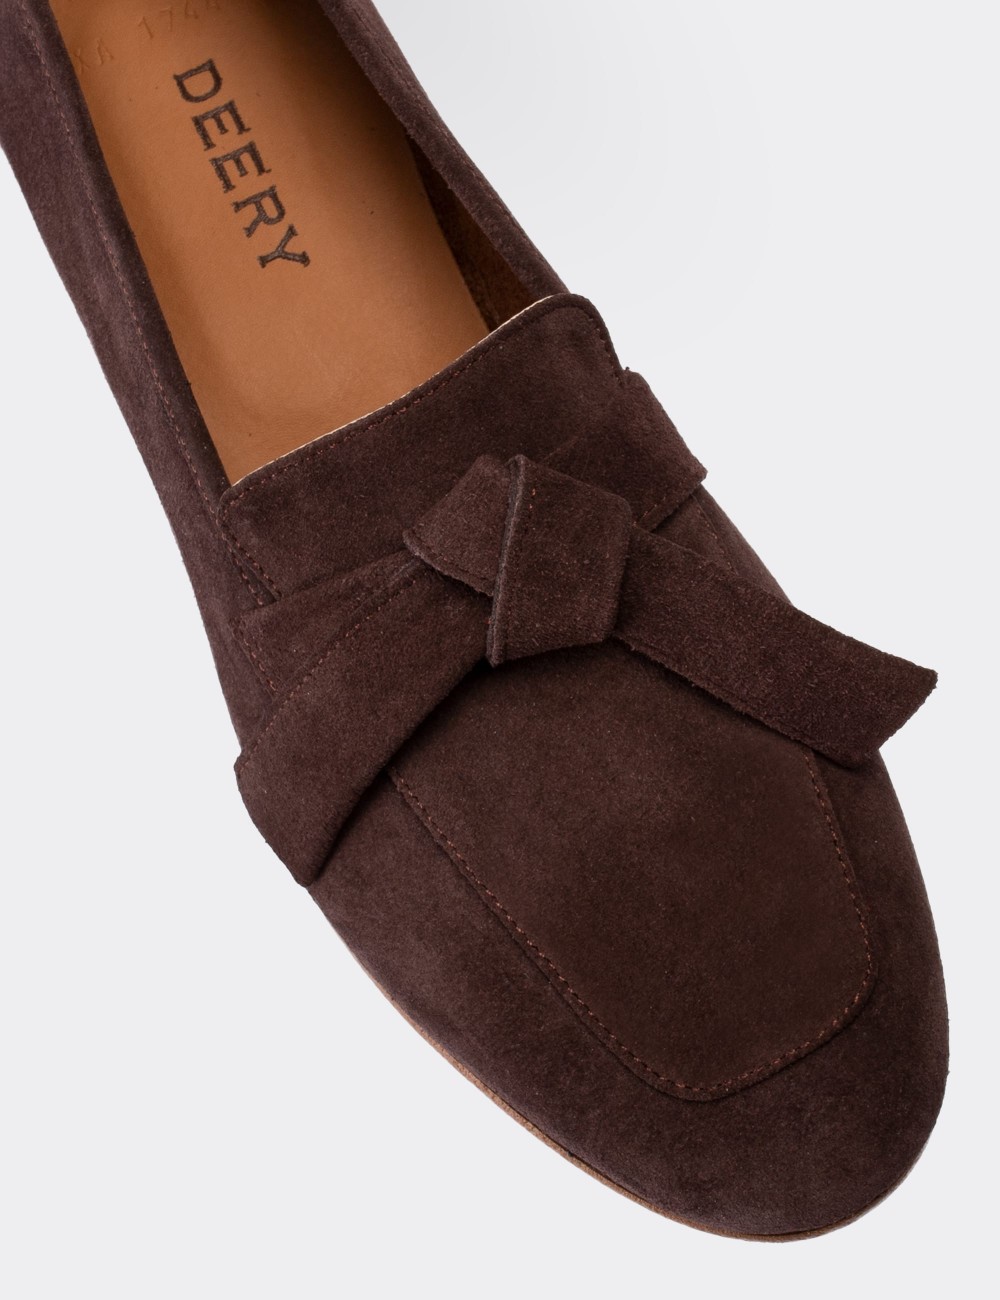 Brown Suede Leather Loafers - 01744ZKHVM01